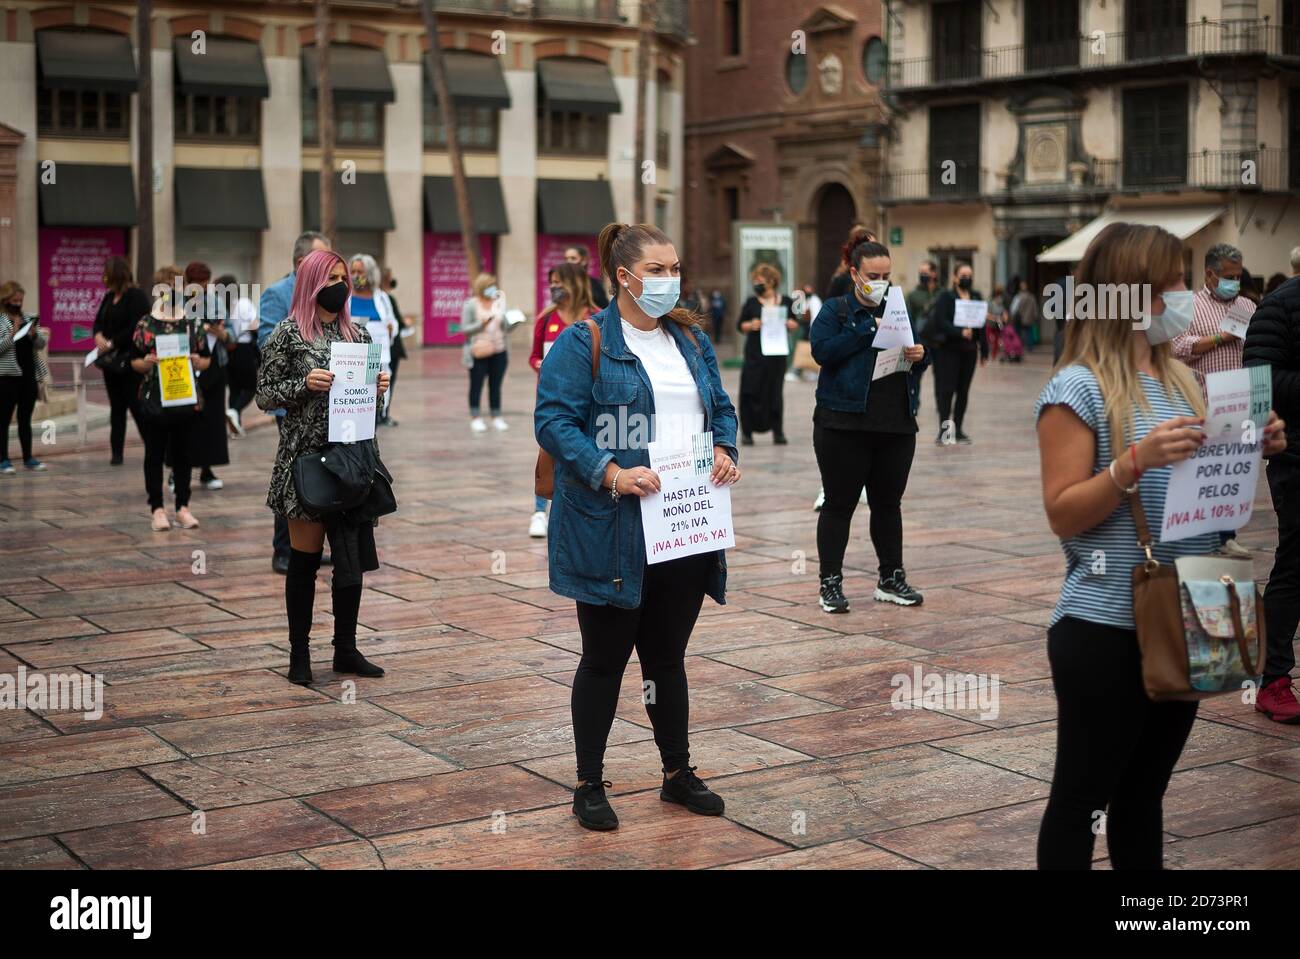 Protesters wearing face masks hold placards expressing their opinions at Plaza de la Constitucion square during the demonstration.The association of hairdresser and Malaga beauty association  demand the government to lower VAT rate from 21% to 10% for their sector, which is considered an 'essential jobs' under the context of the coronavirus pandemic. The hairdressers and beauty centres were closed due to the coronavirus pandemic and many of them have lost their incomes, after it reopening with restrictions and limit capacity. Stock Photo